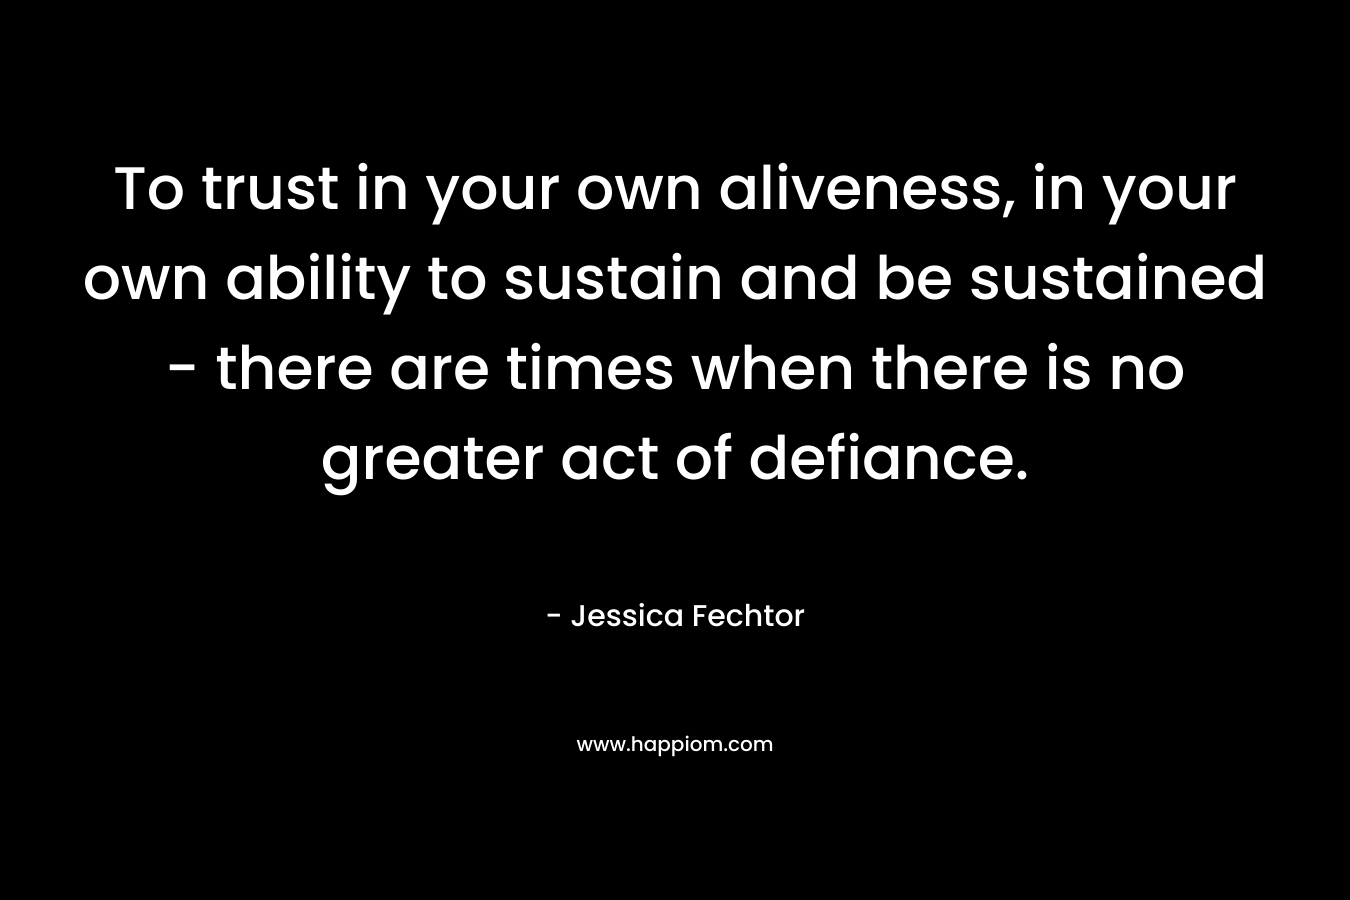 To trust in your own aliveness, in your own ability to sustain and be sustained - there are times when there is no greater act of defiance.